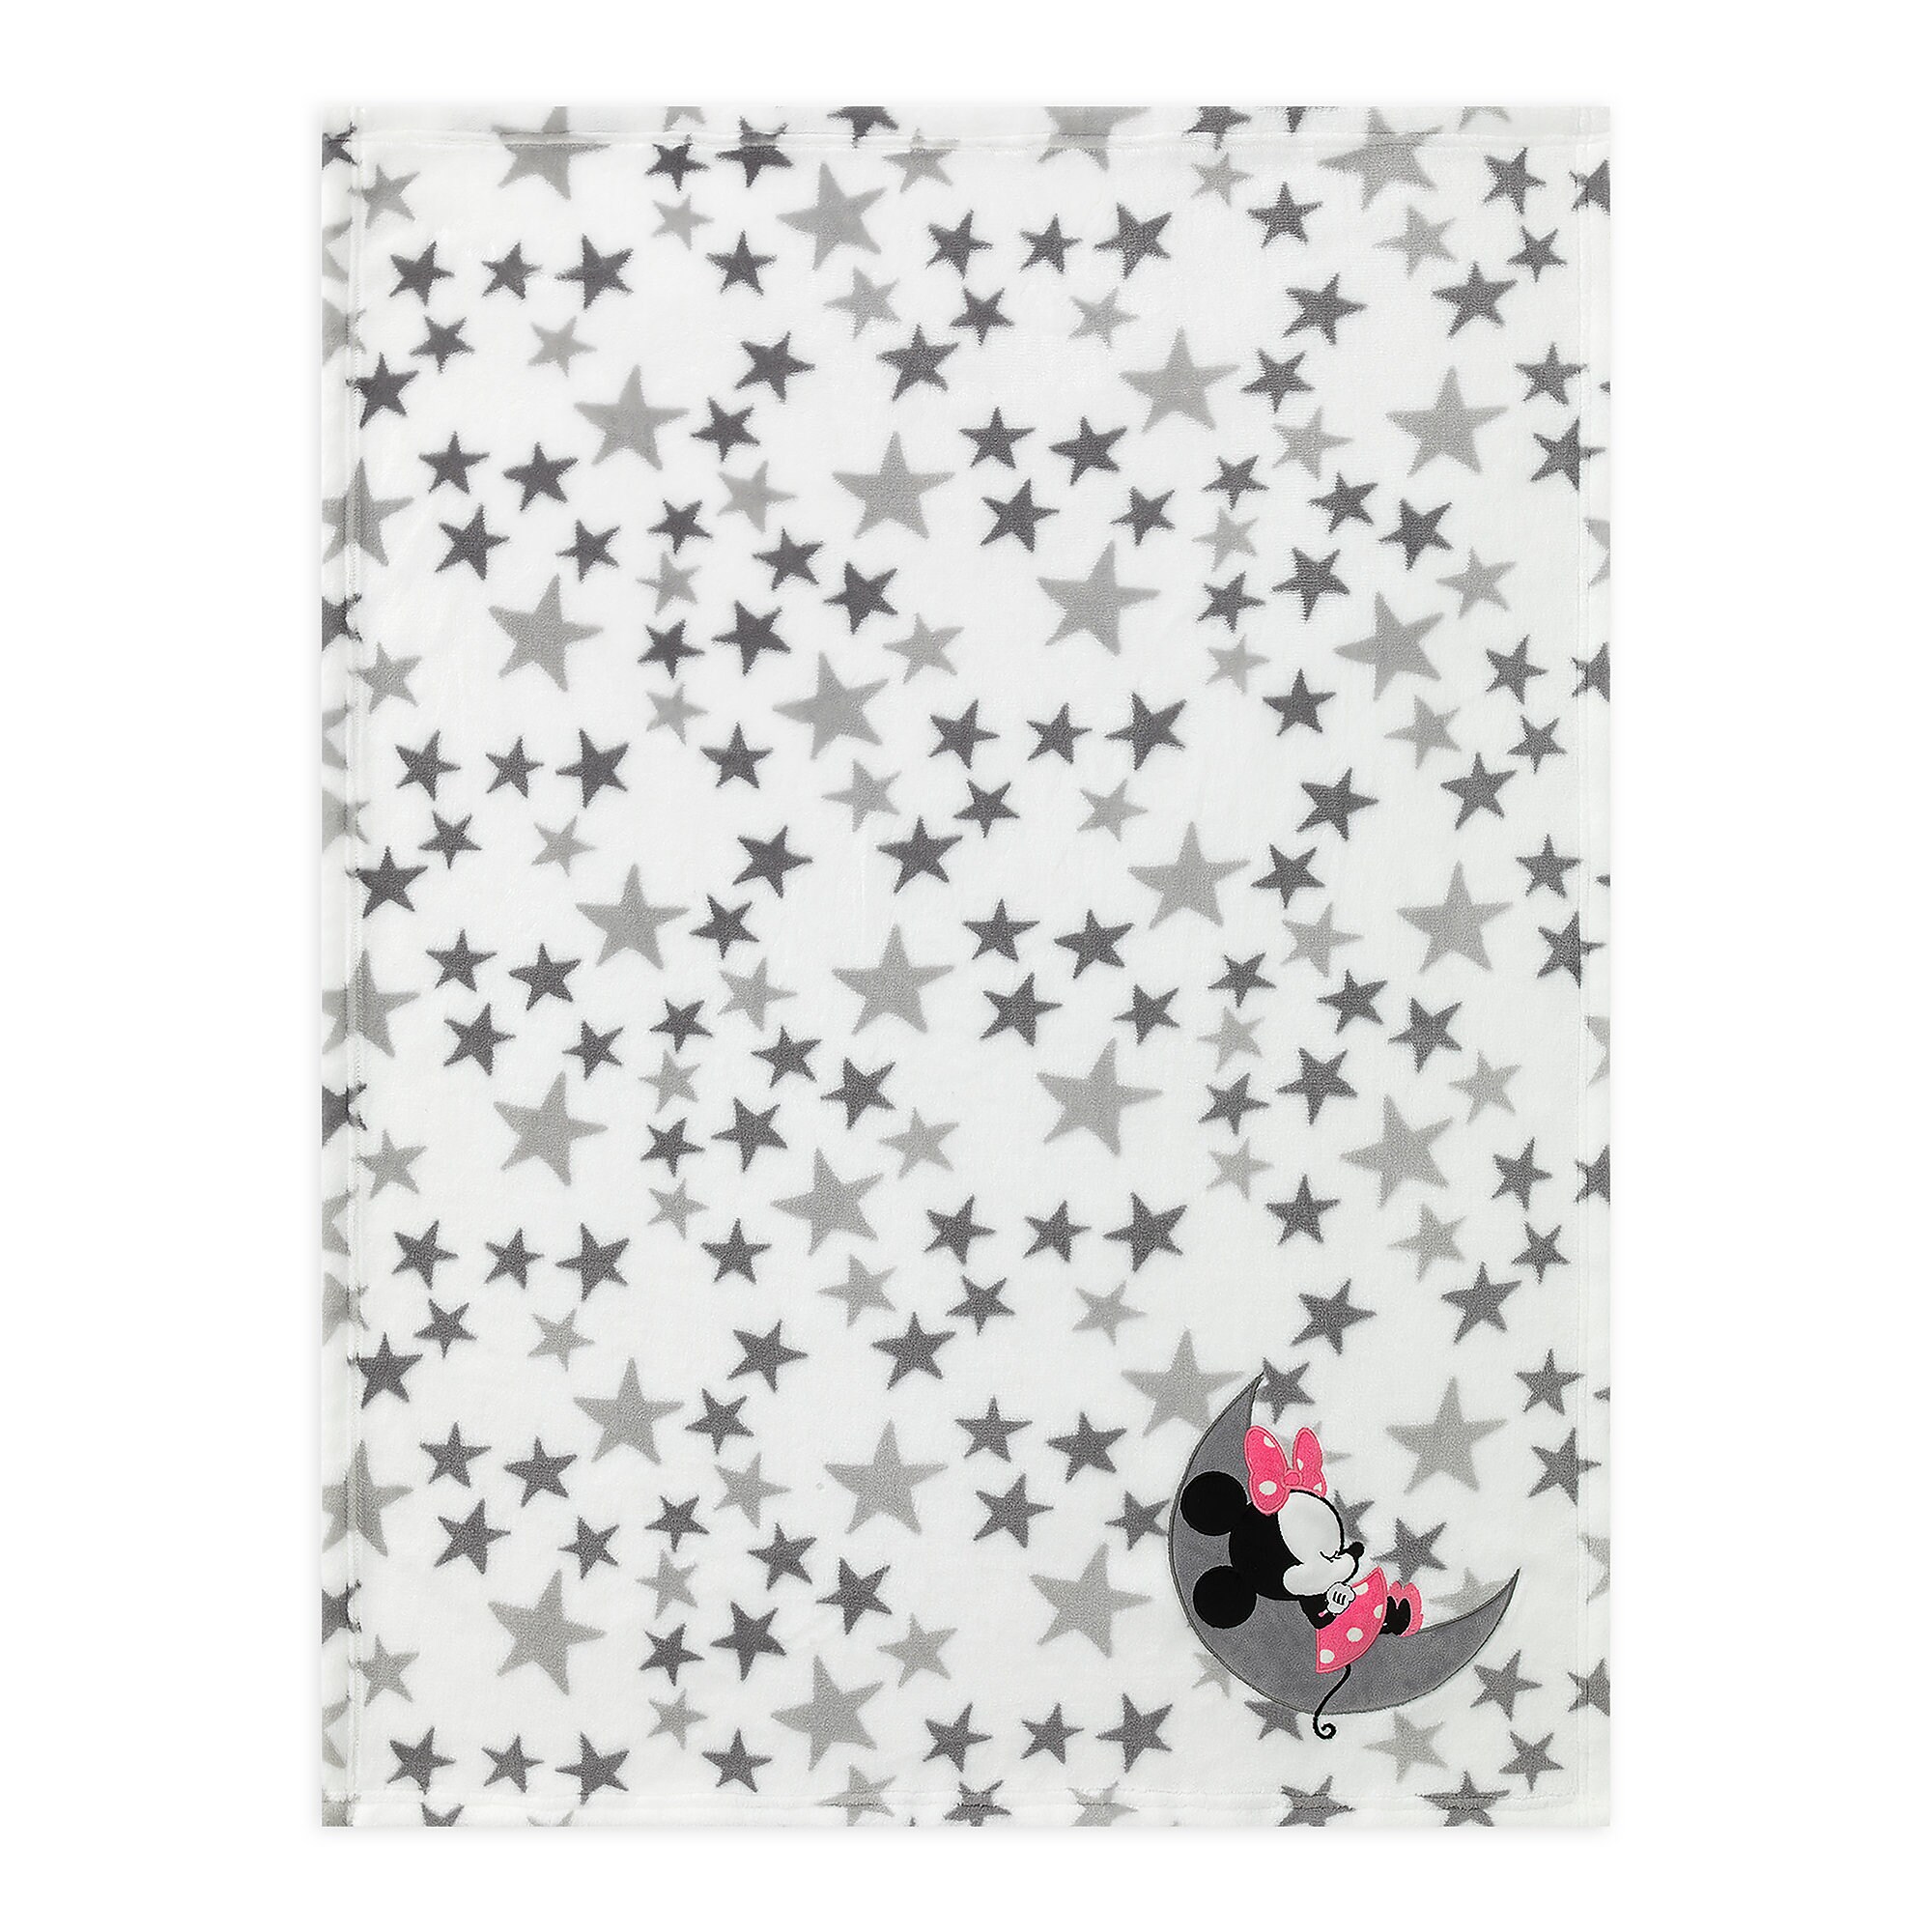 Minnie Mouse Baby Blanket by Lambs & Ivy